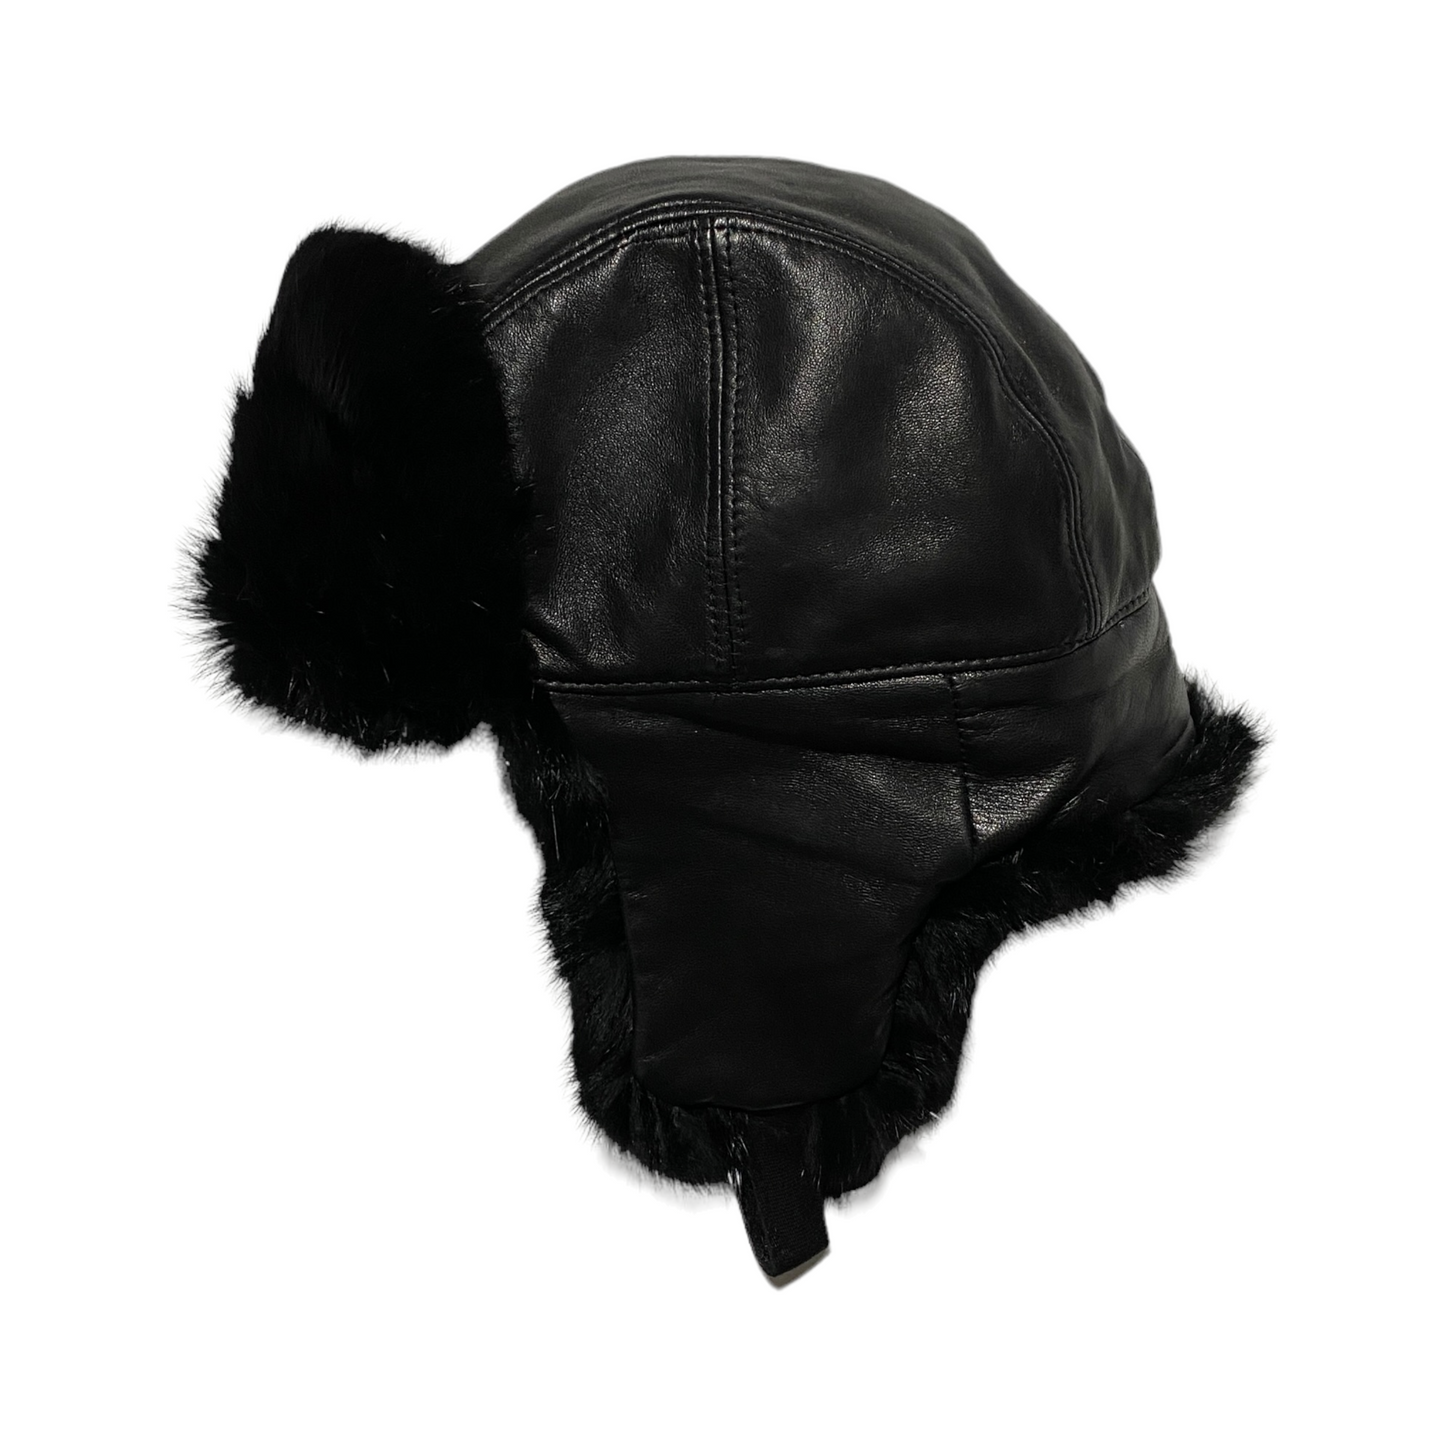 00's Gucci leather hat